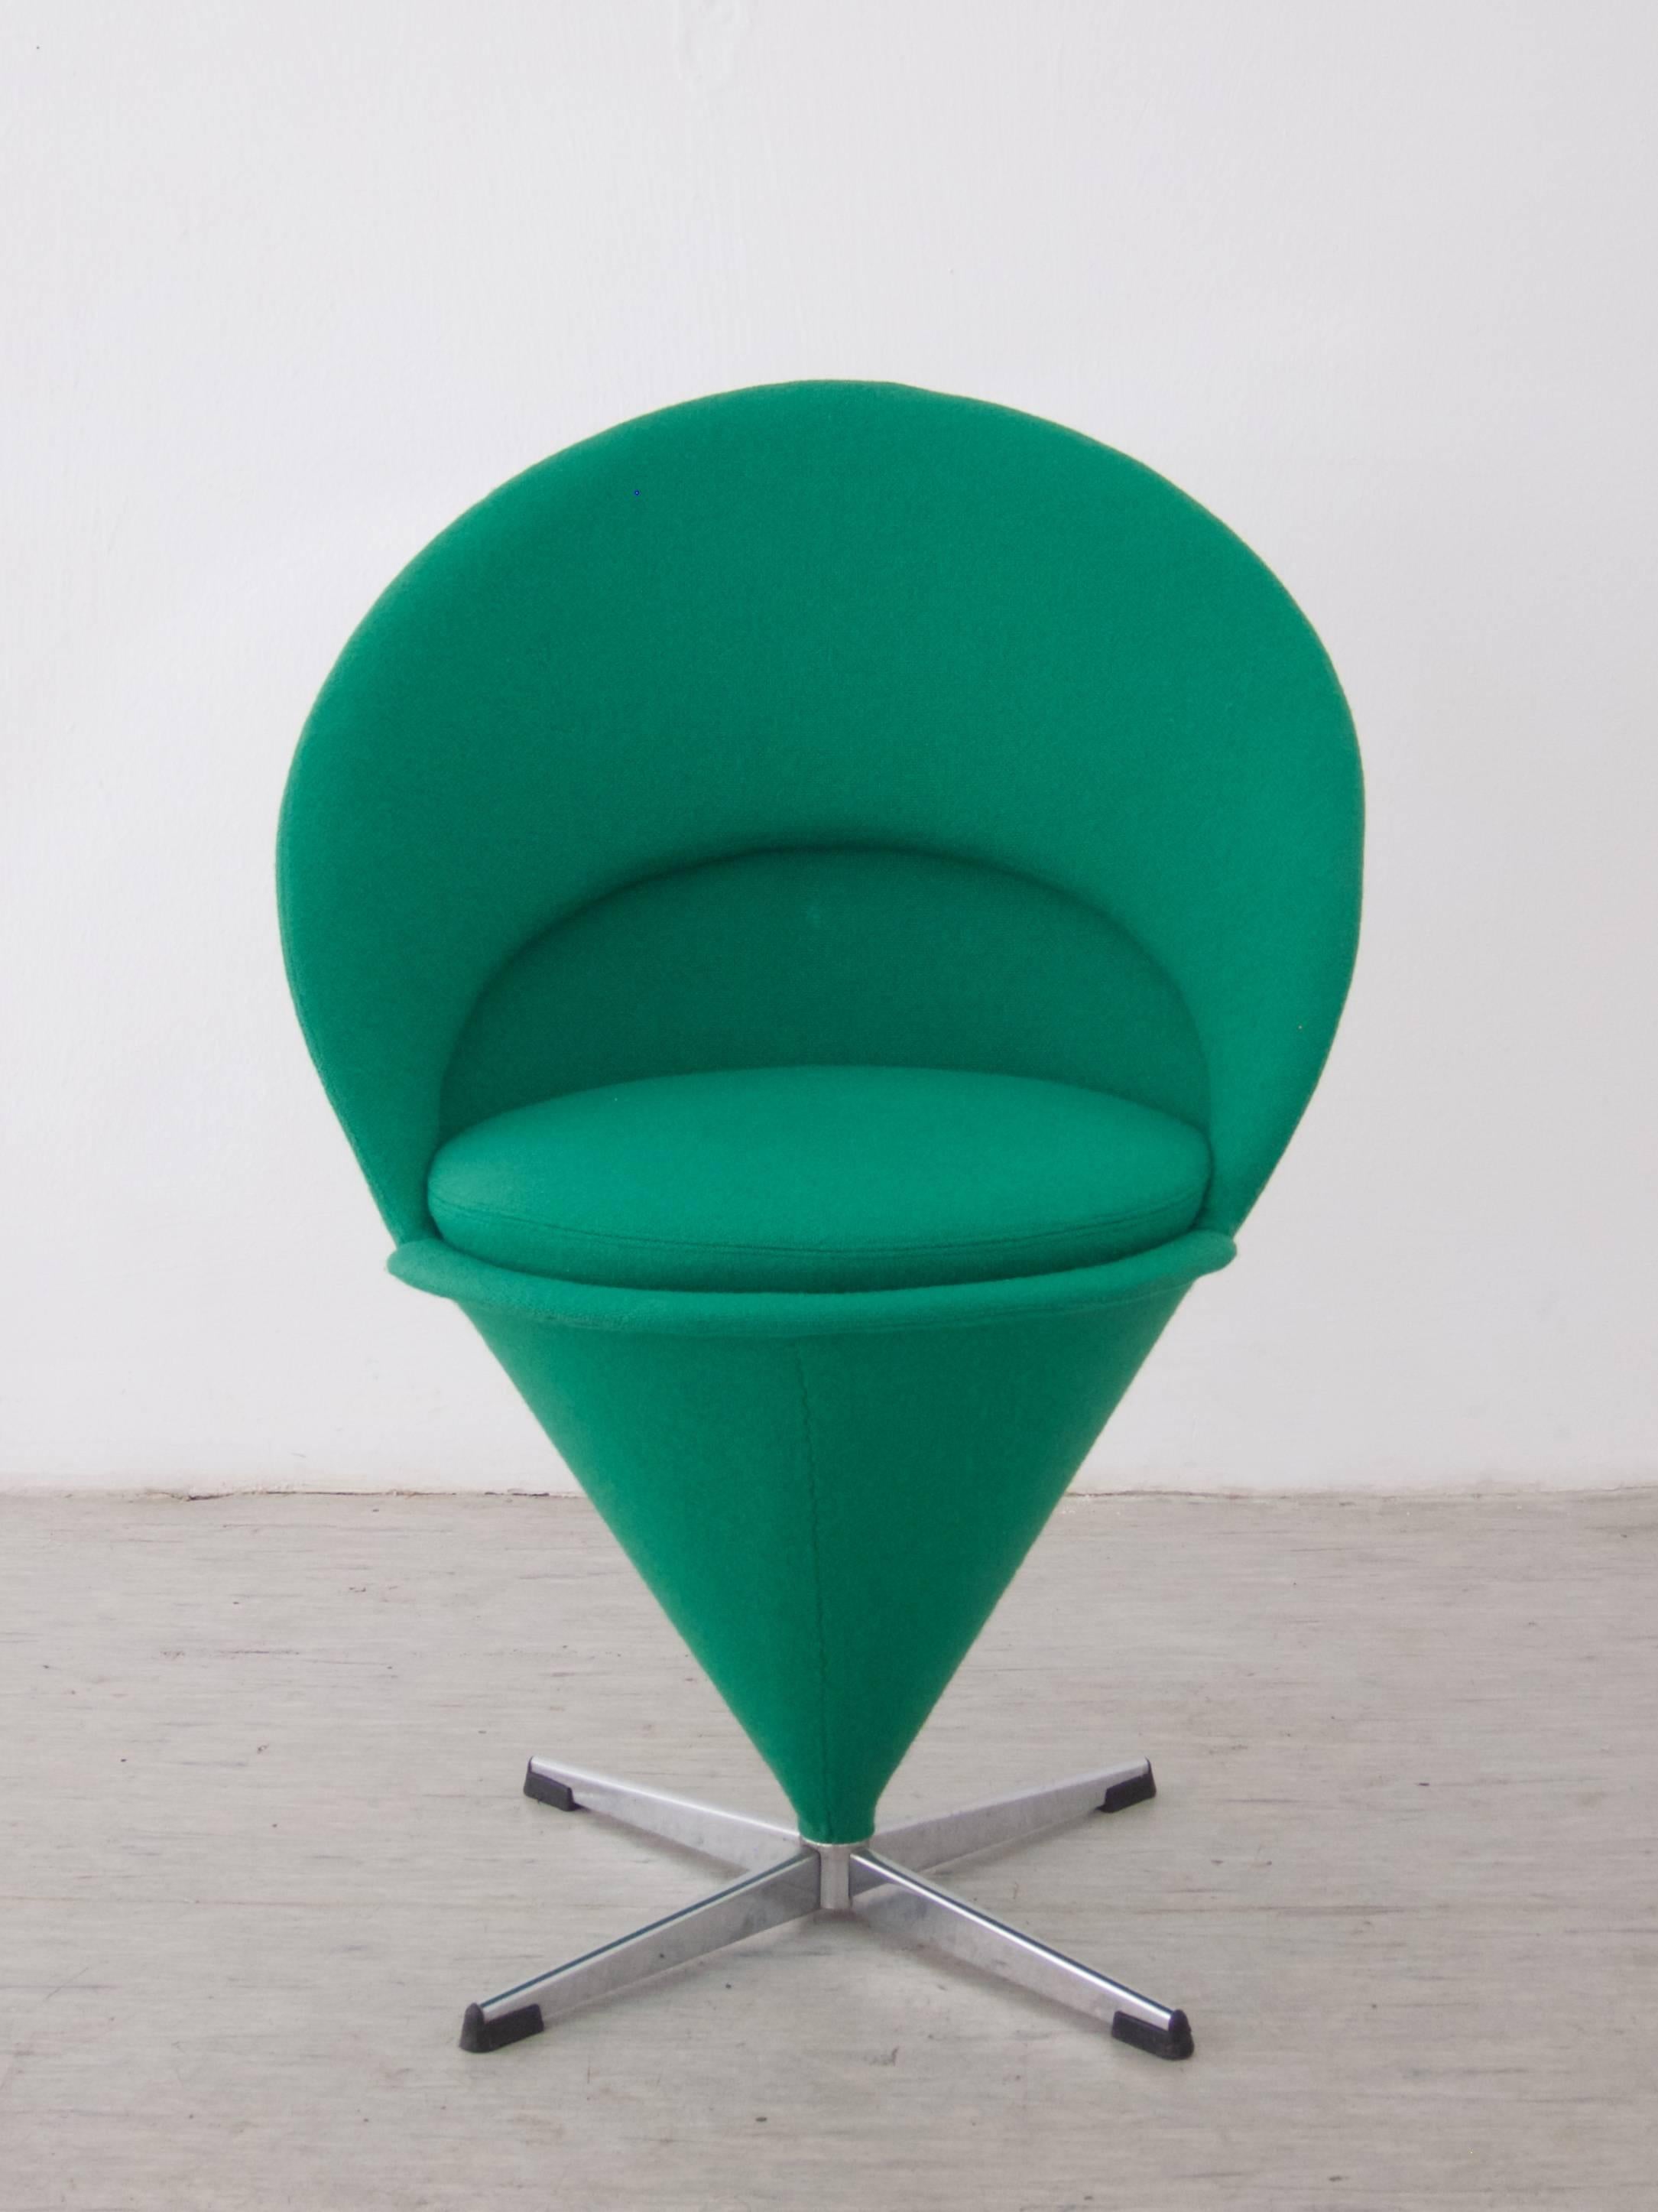 Cone chair, 1959 designed by Verner Panton for a Danish restaurant.
Around 15 years ago upholstered with an original, green Tonus fabric by Kvadrat.
Since then forgotten in a storage.